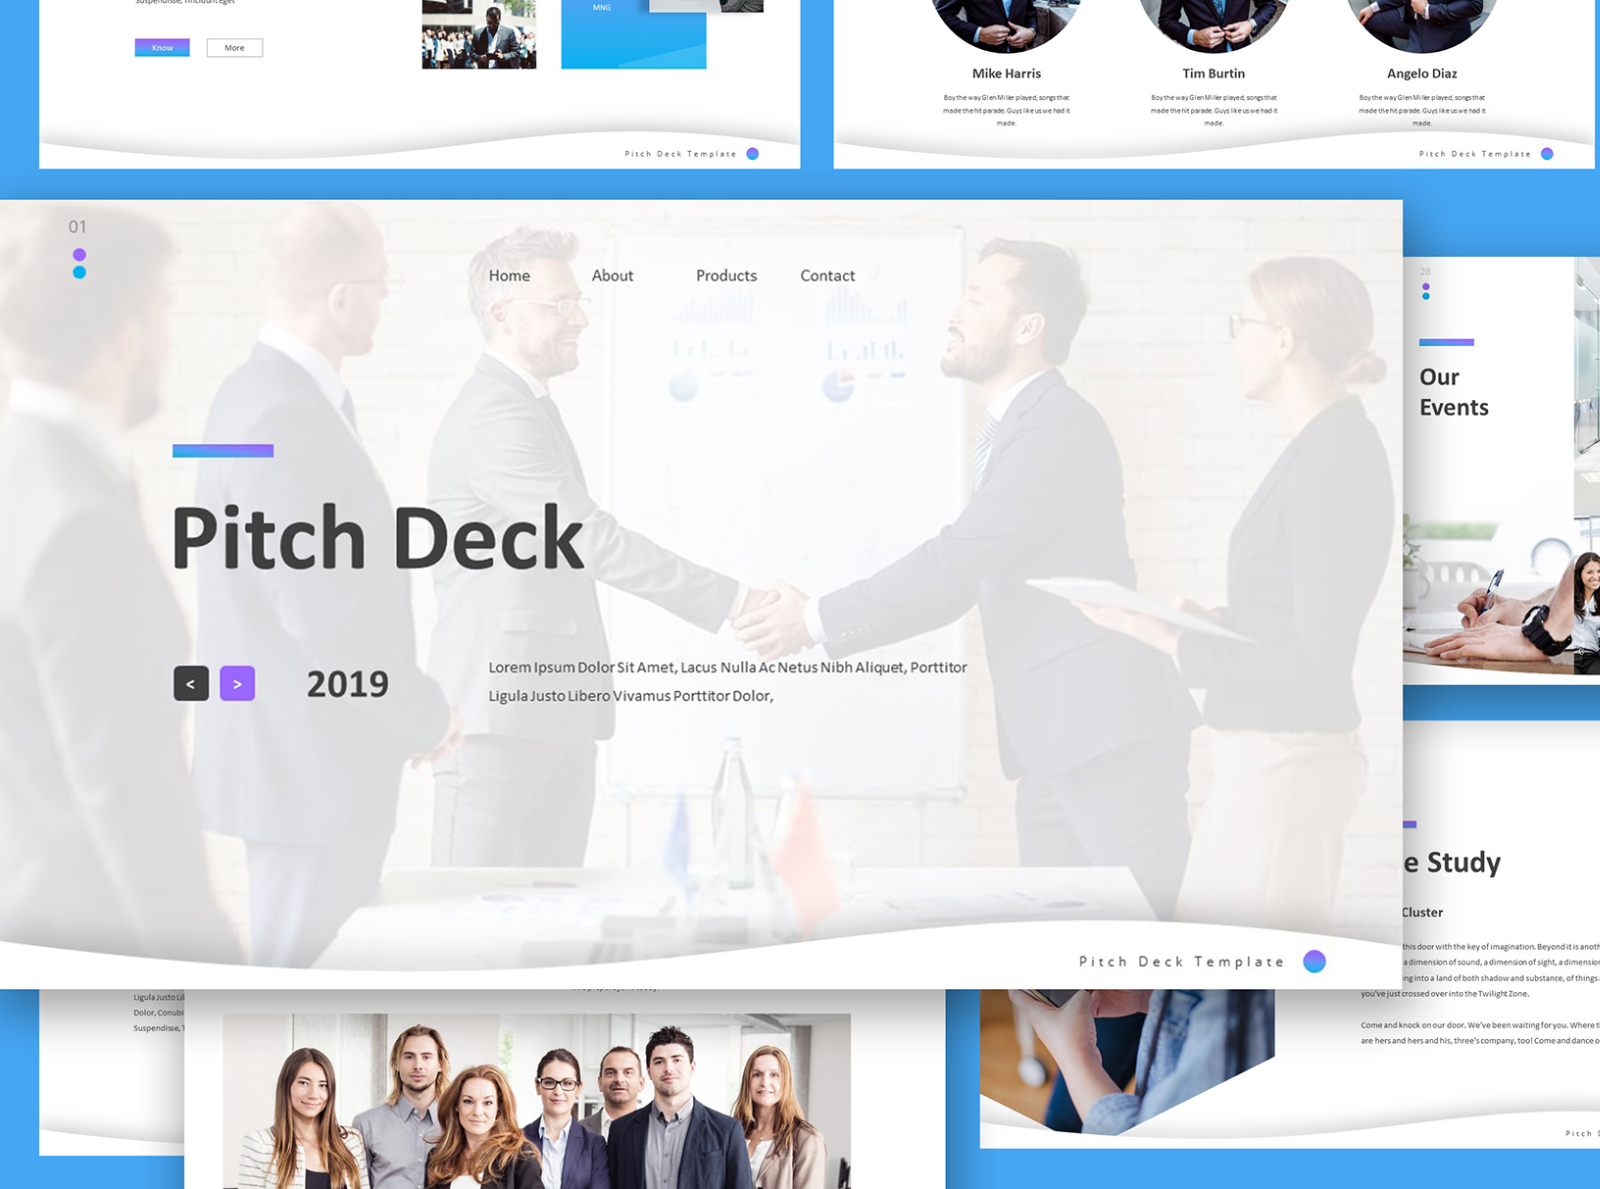 Pitch Deck Google Slides Template by Giant Design on Dribbble